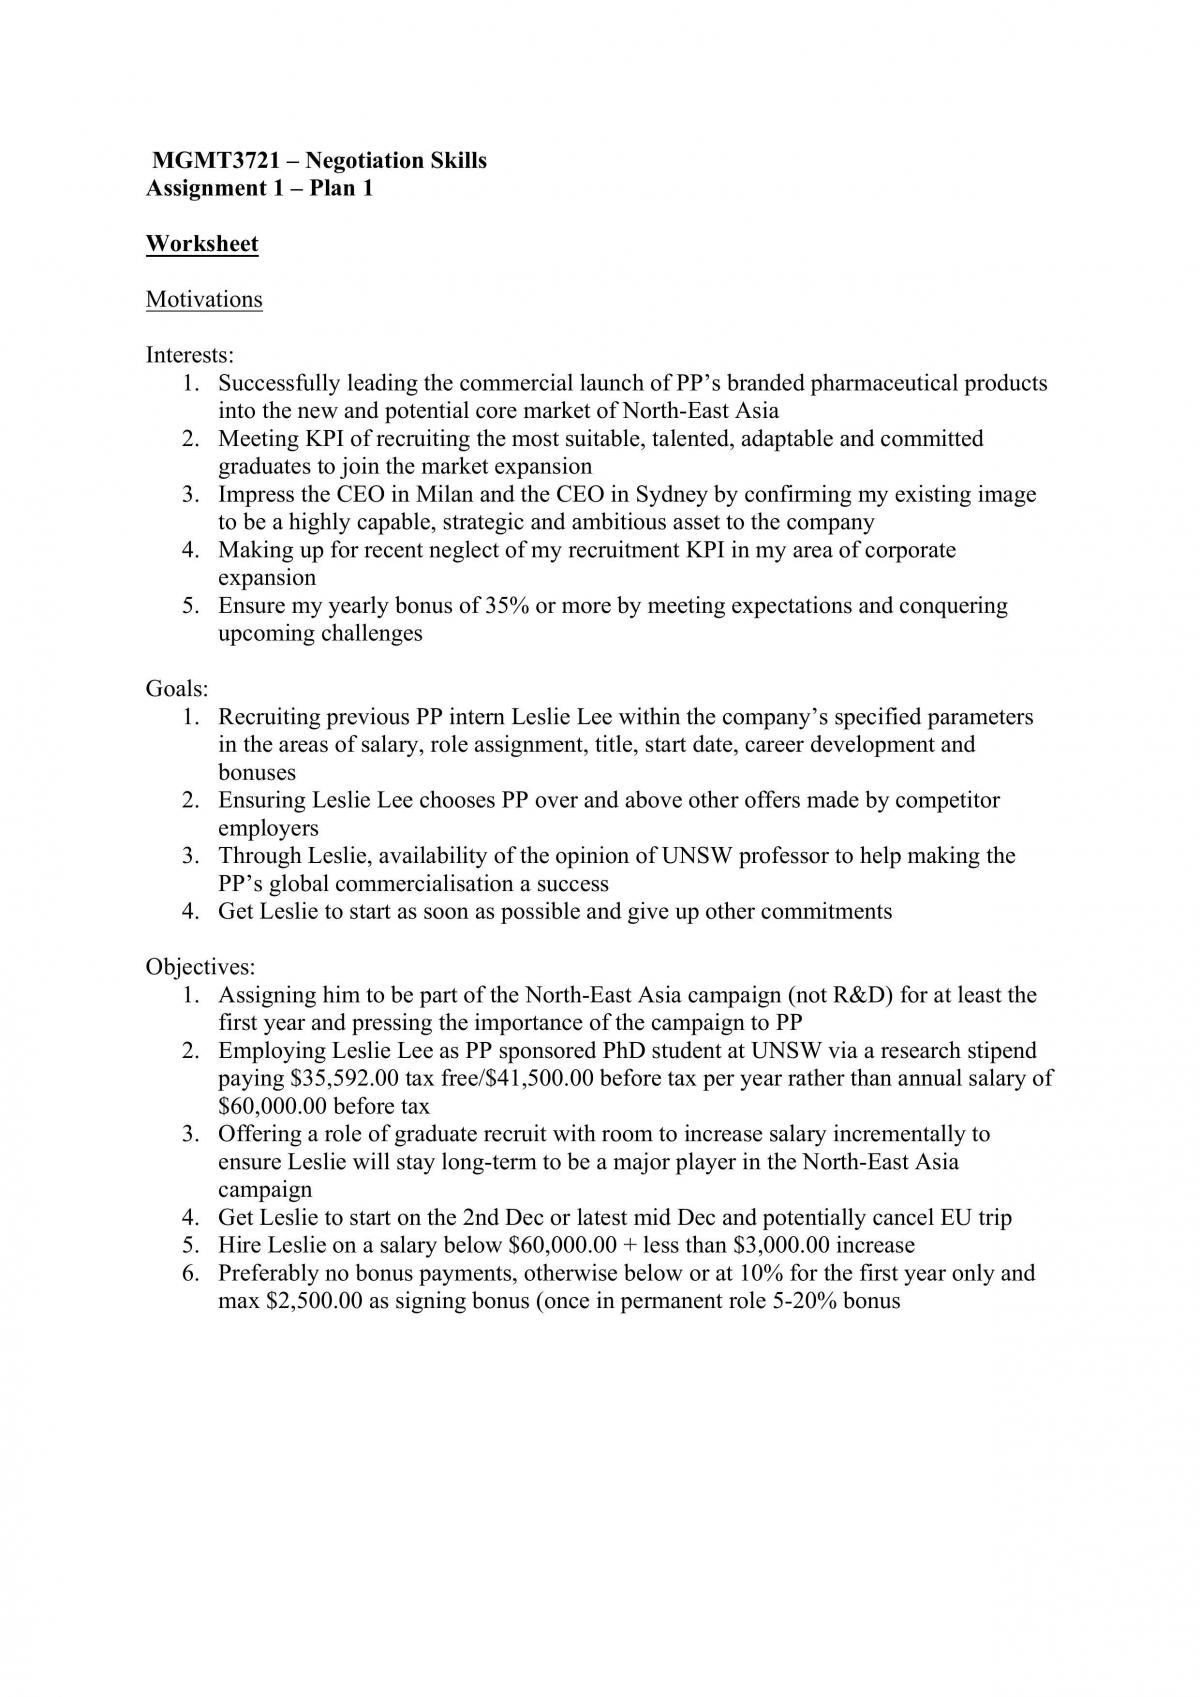 Plan 1 for Negotiation Skills - Page 1